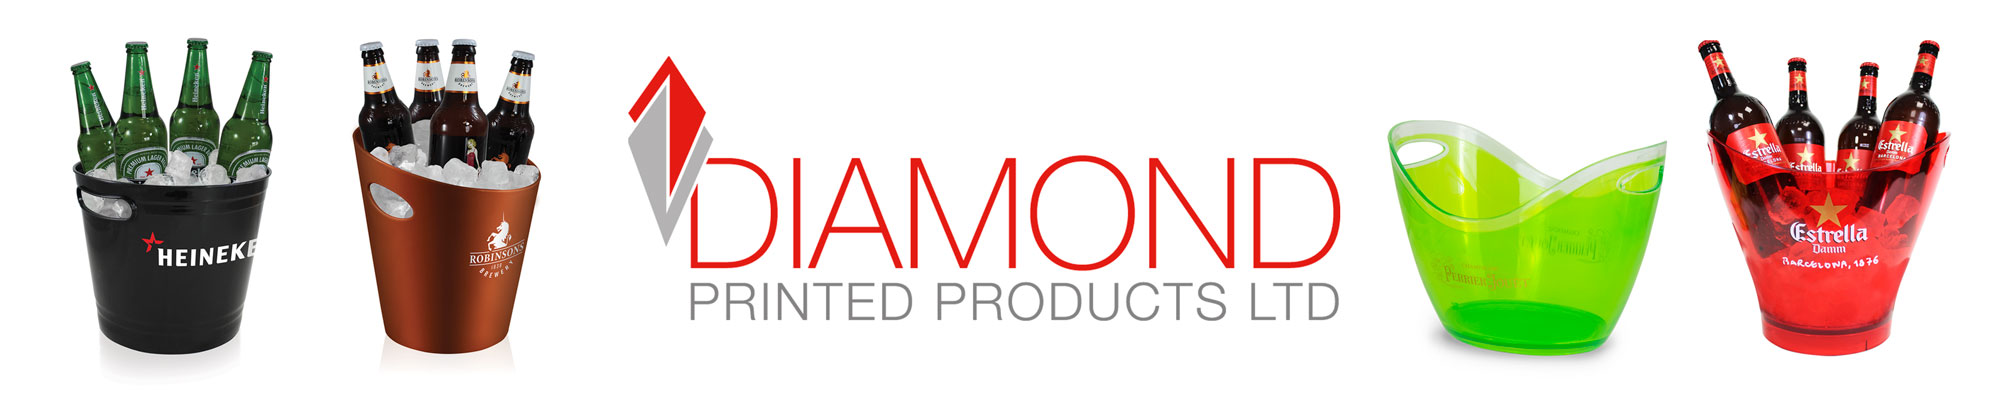 Diamond-Printed-Products-Banner-1